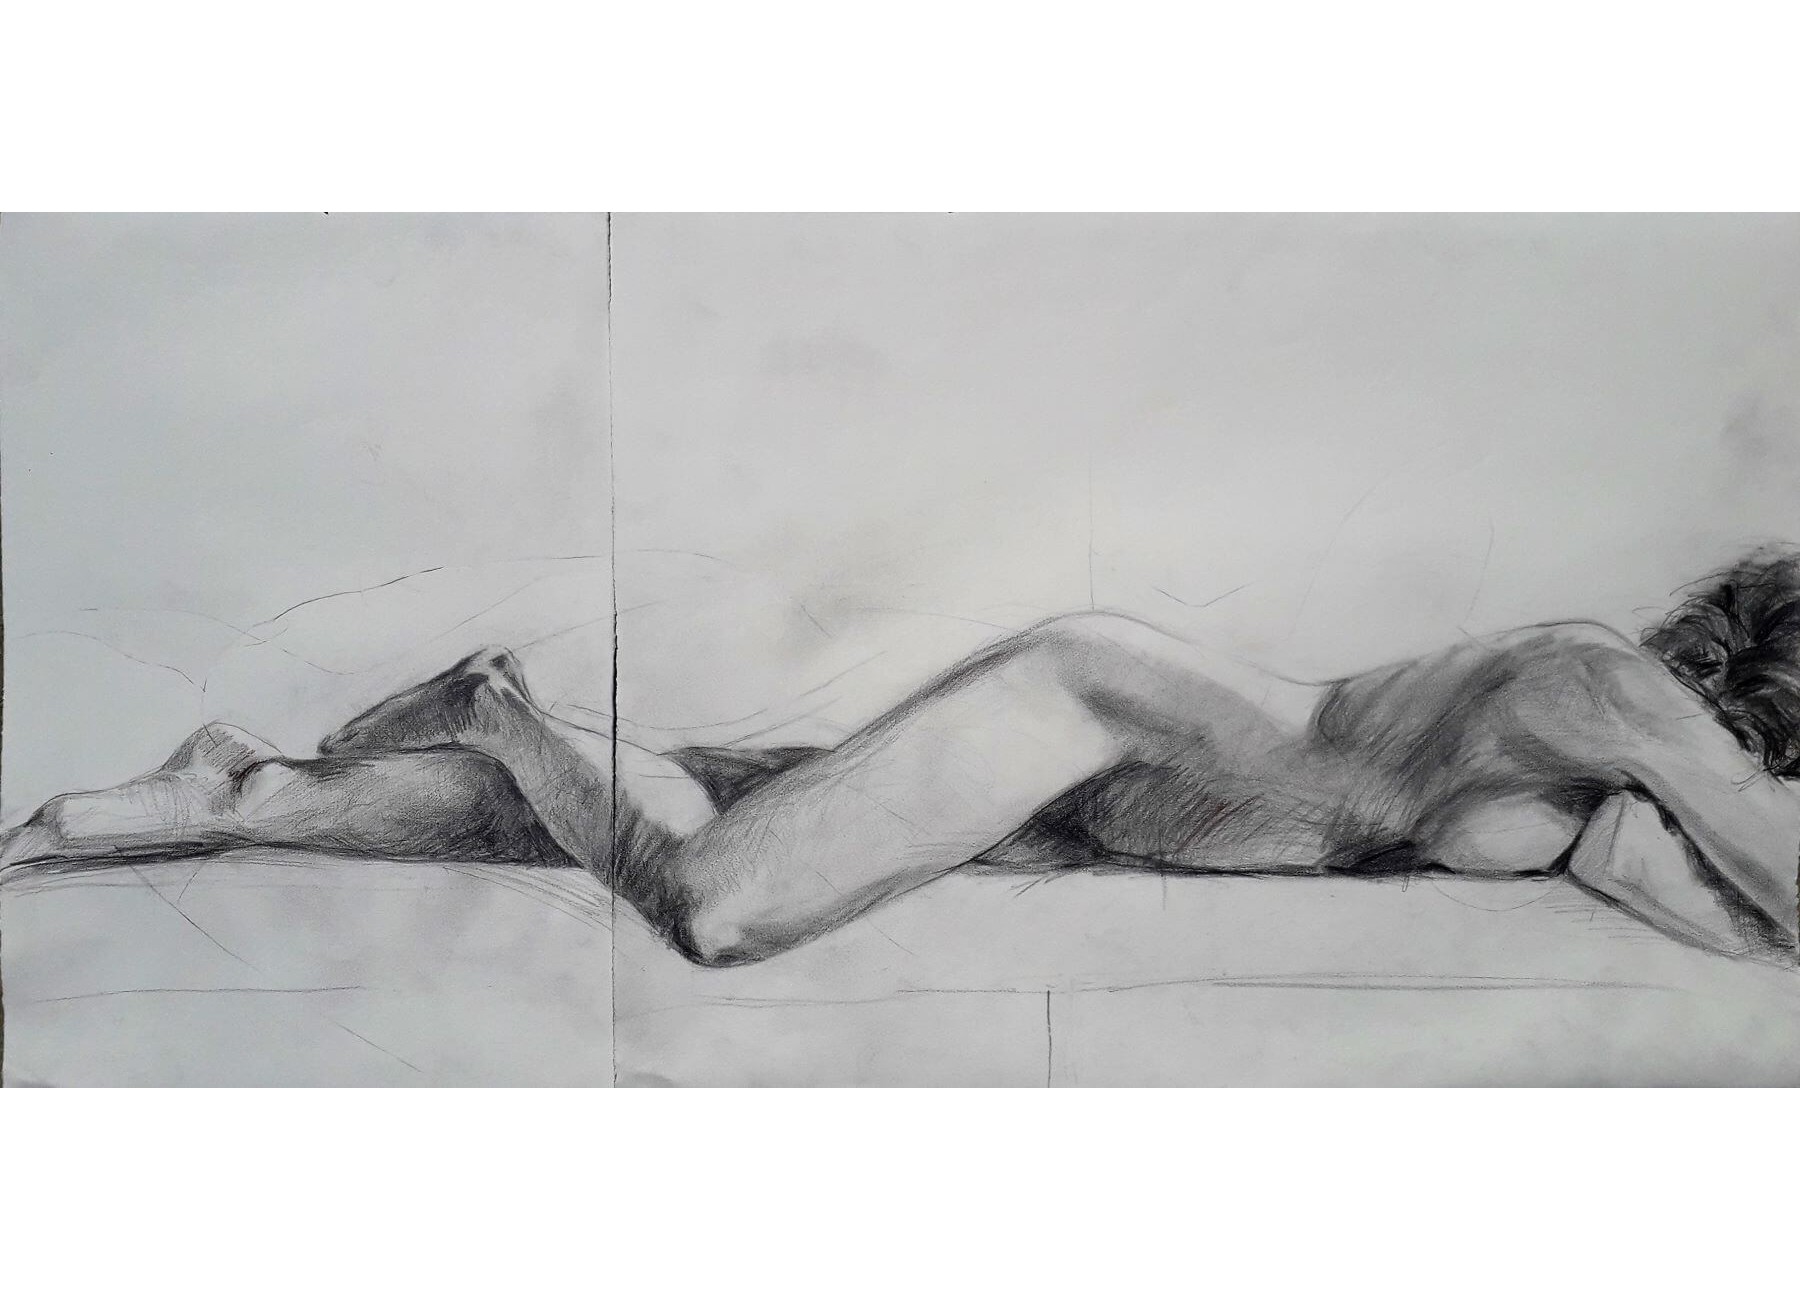 How I See It - drawing - graphite on paper, by artist Neva Bergemann